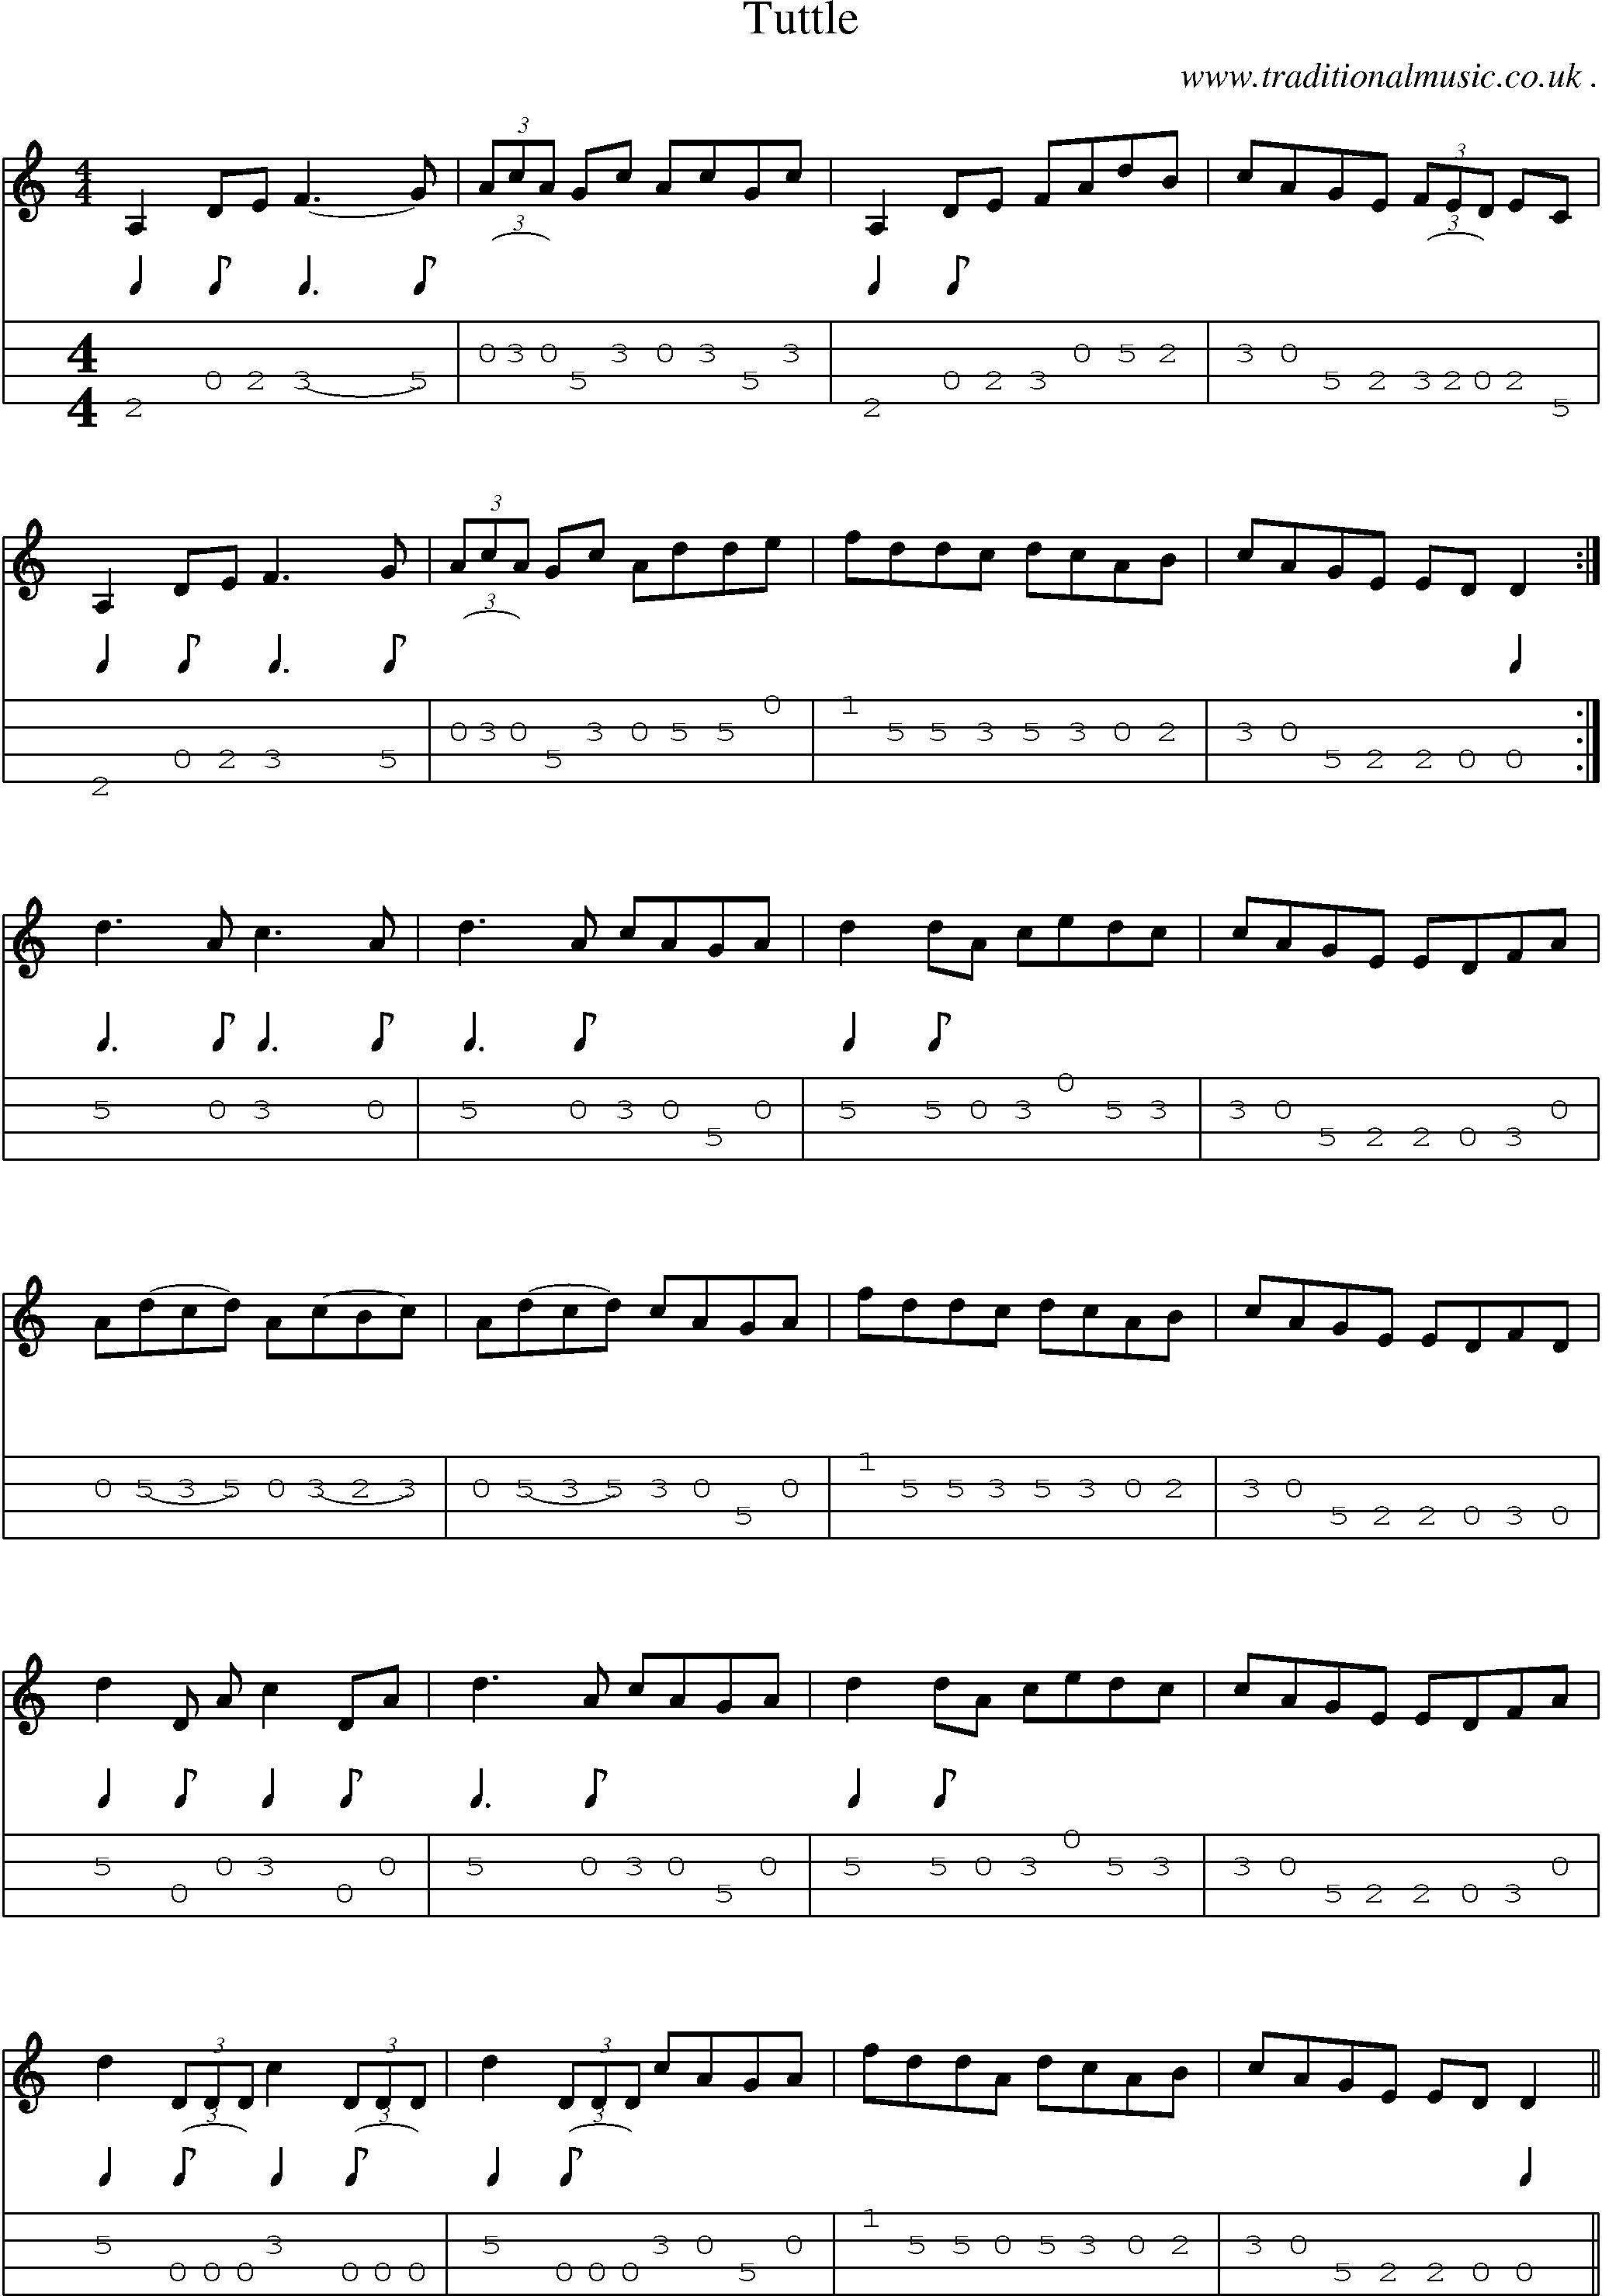 Sheet-Music and Mandolin Tabs for Tuttle